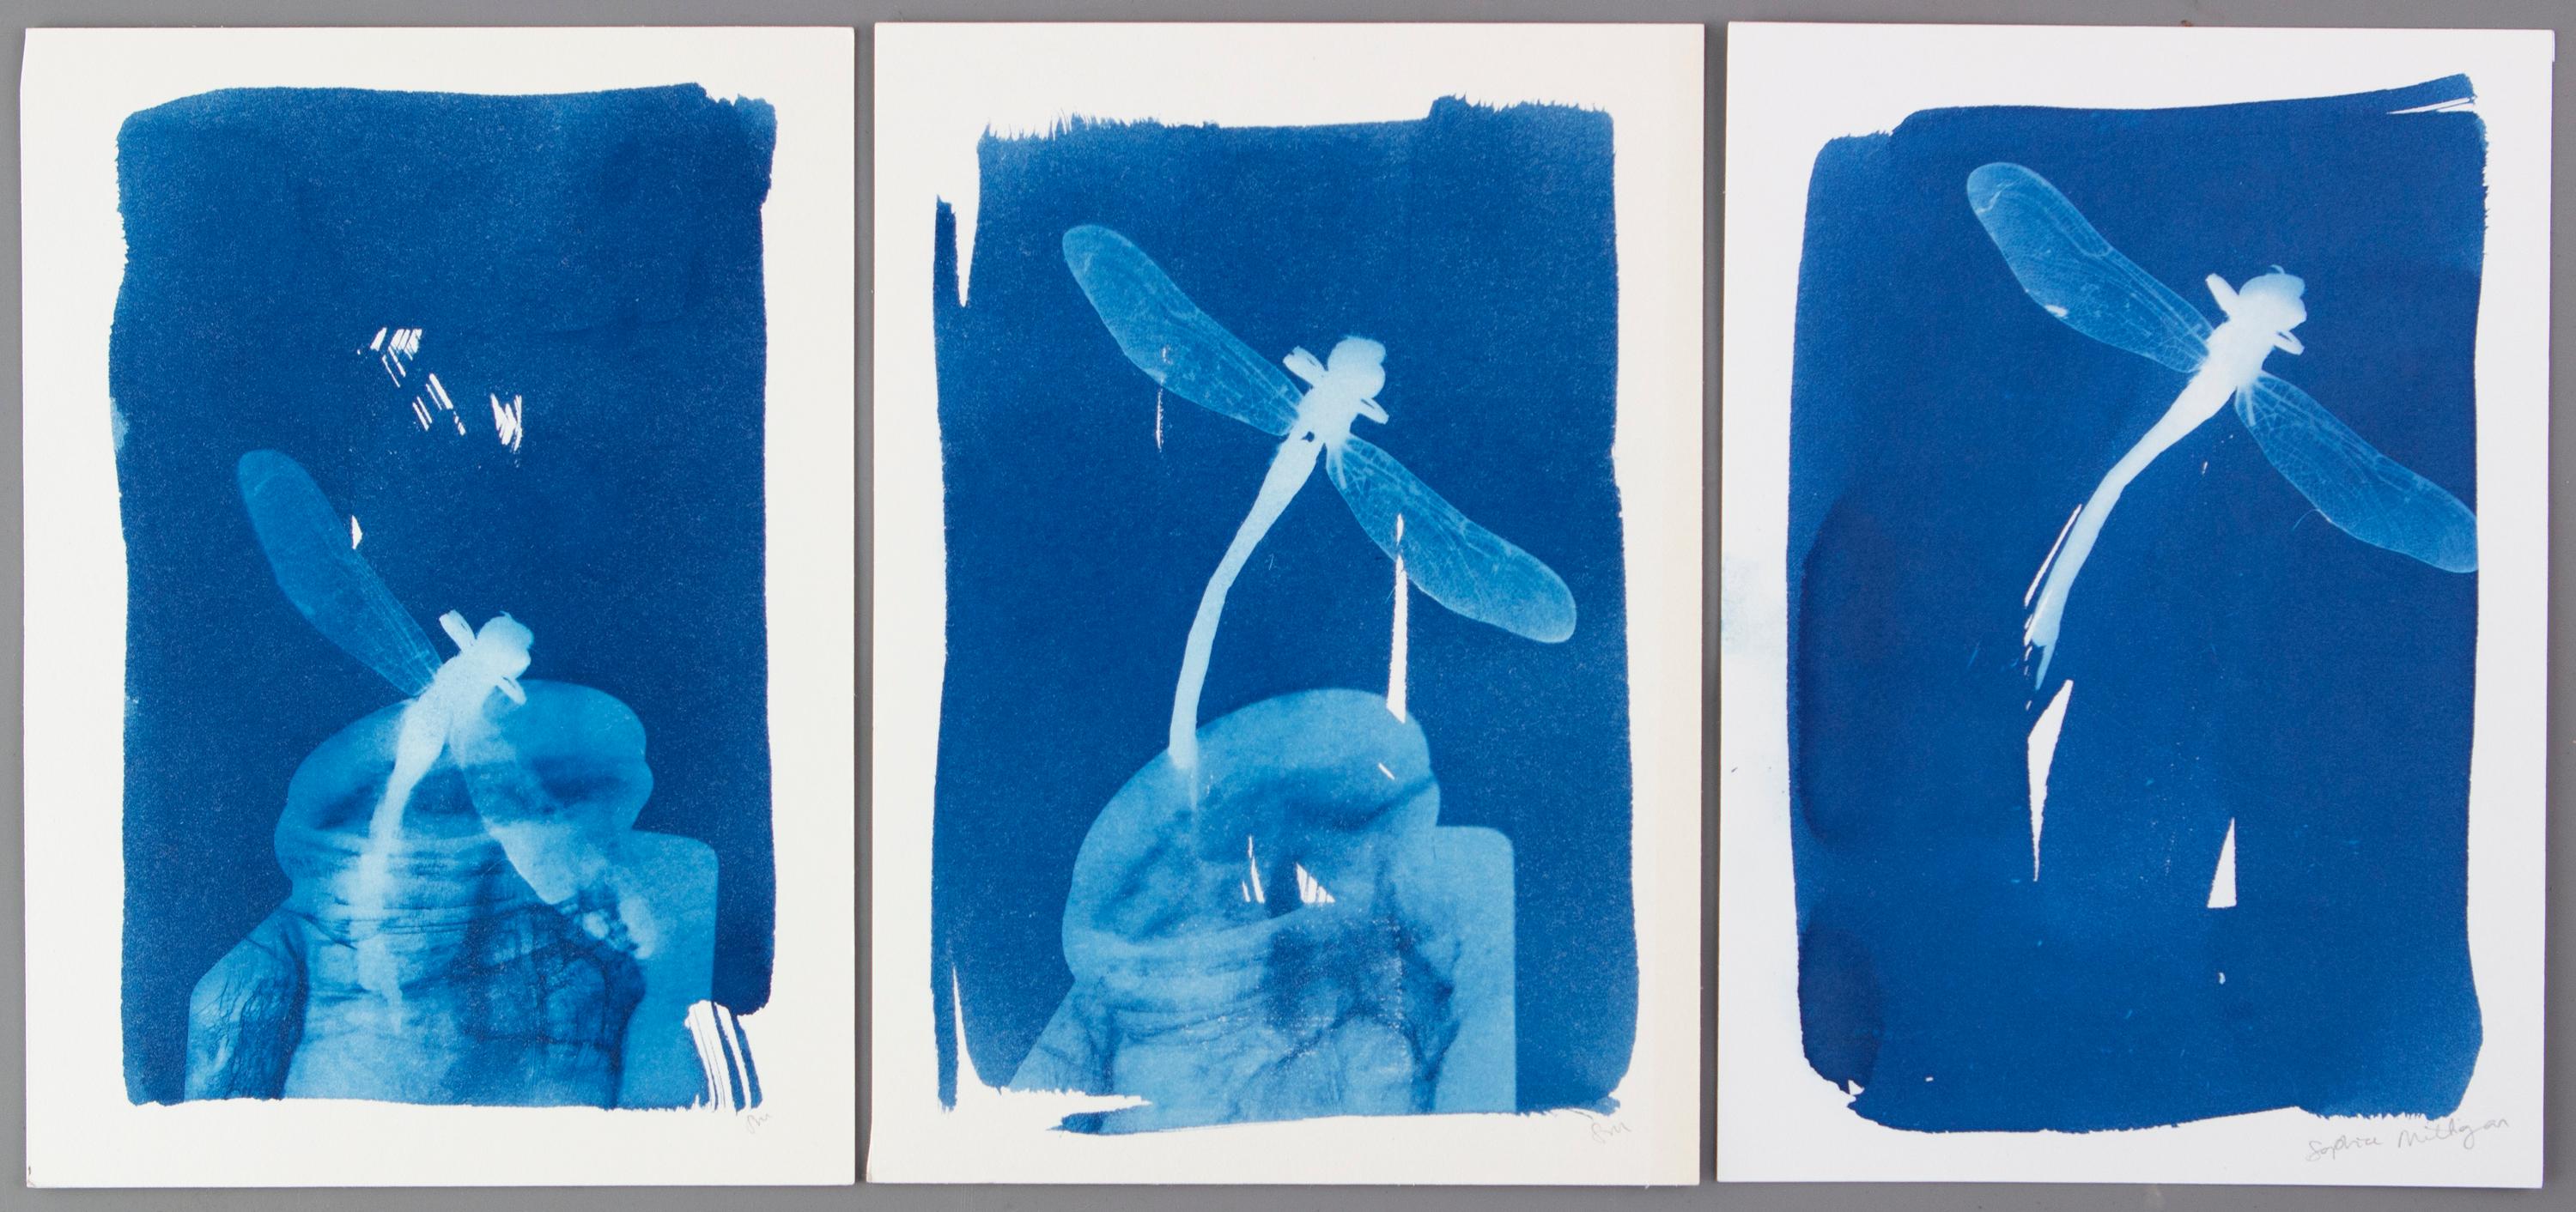 'Hope, Change, and Love'. Dragonfly triptych conceptual artwork - Painting by Sophia Milligan